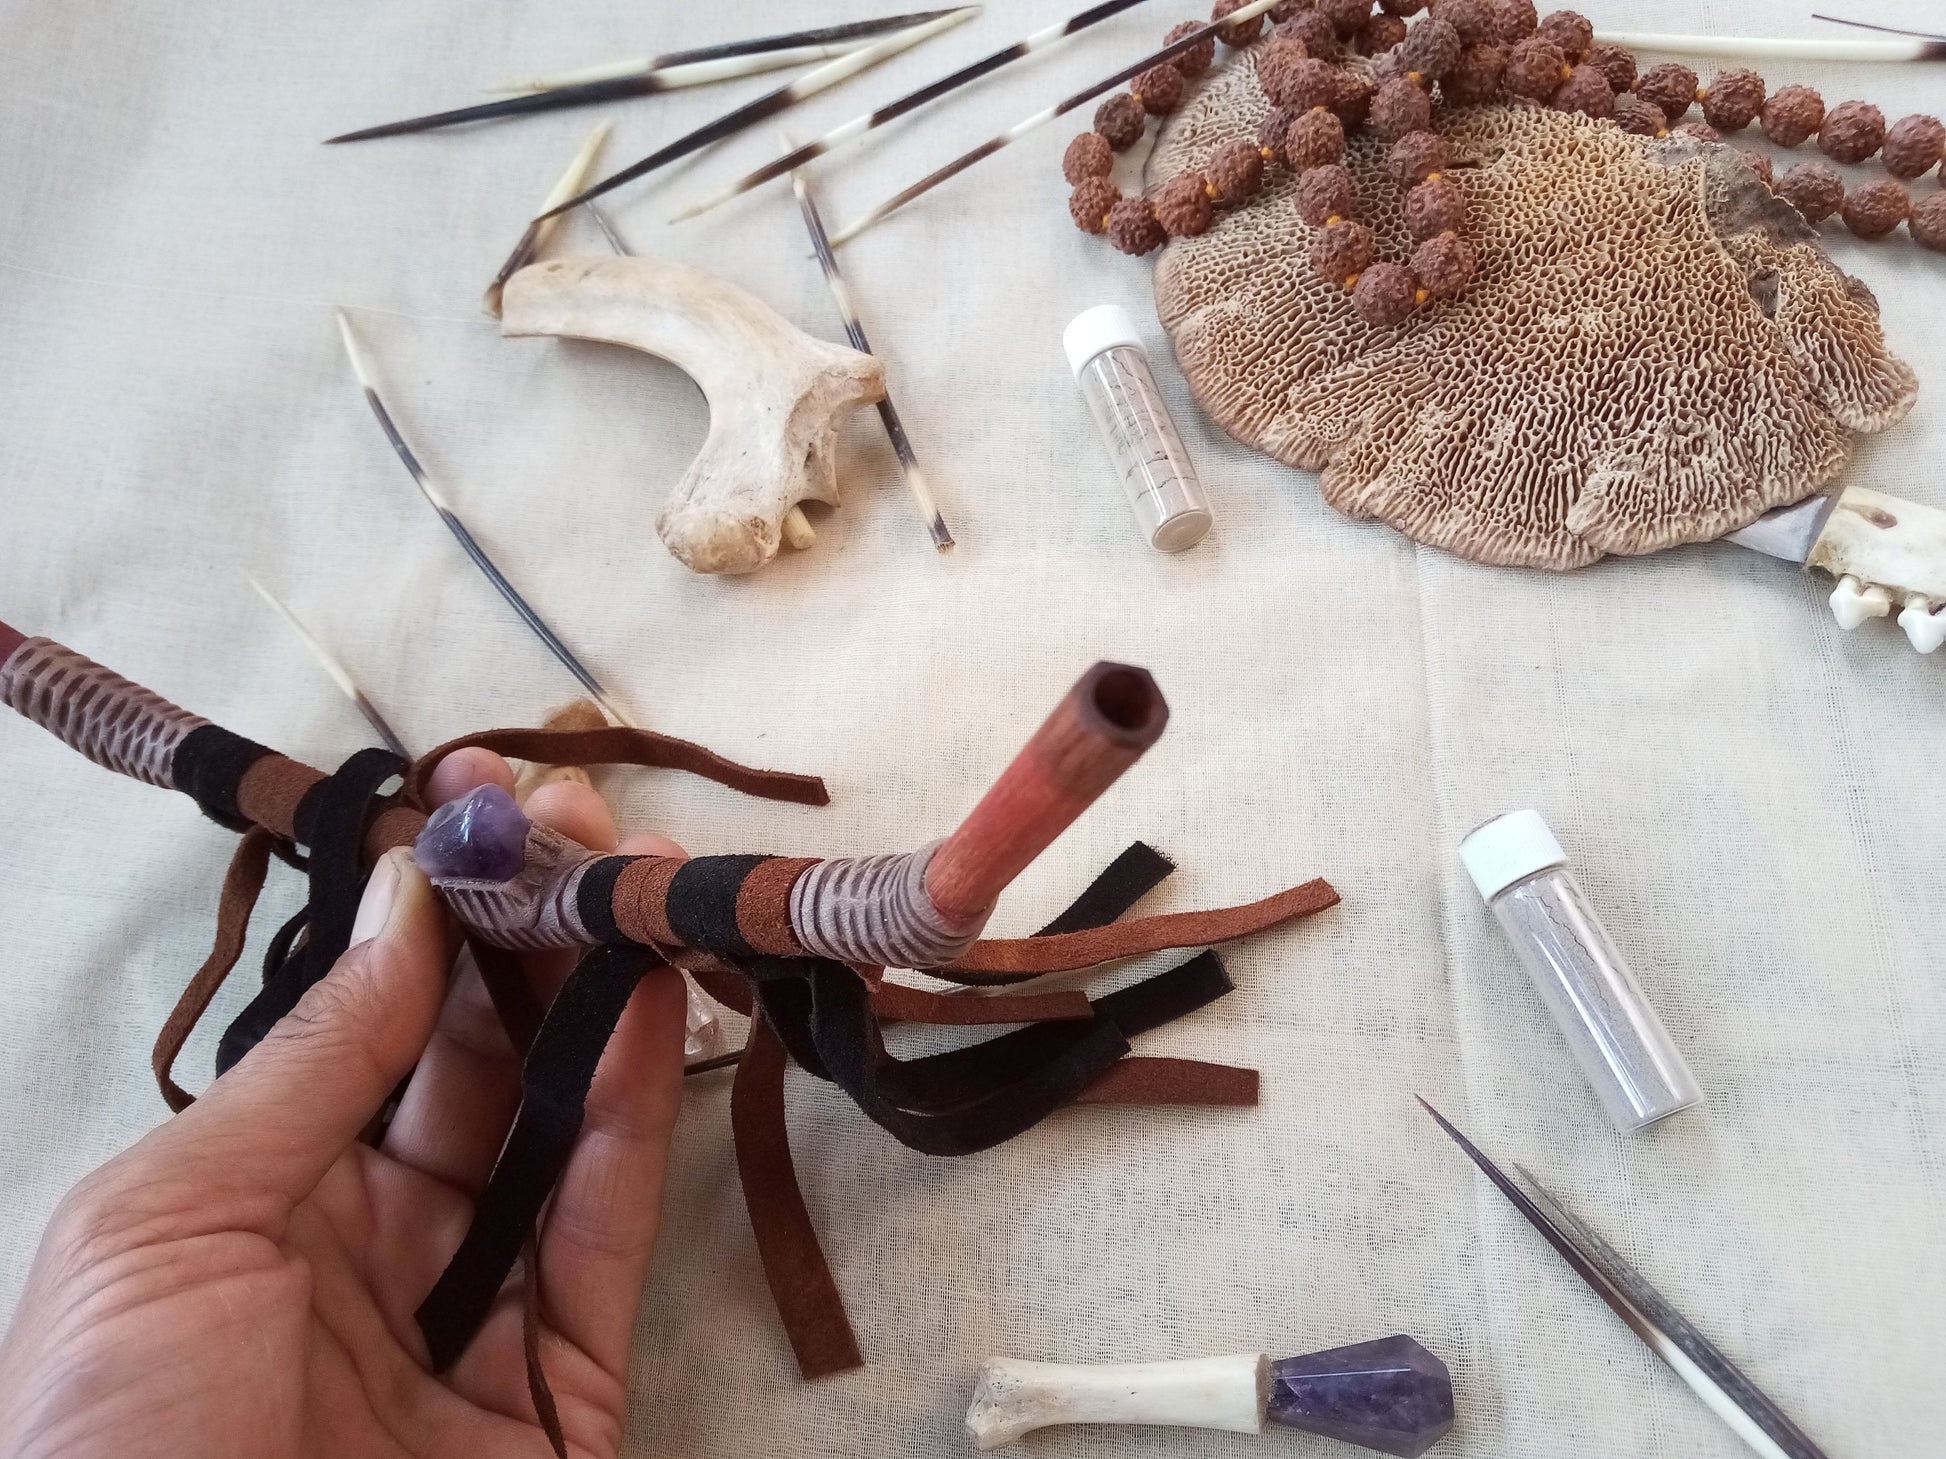 Tepi Rapè applicator - Traditionally used in Ayahuasca or Kambo ceremonies - handmade bamboo pipe with amethyst crystal and leather tassels